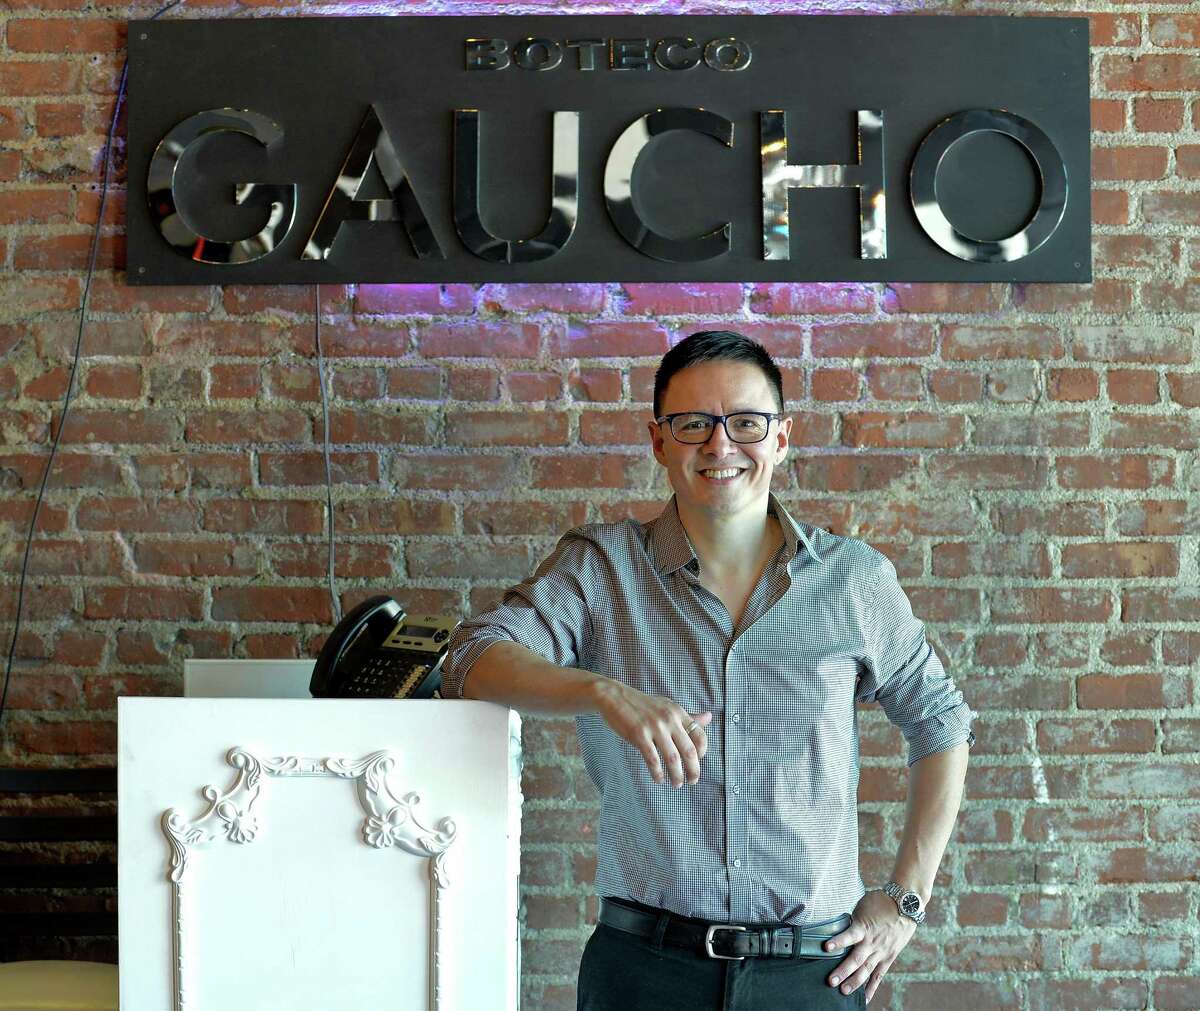 Eduardo Campos is owner of the new Gaucho Boteco restaurant in Stamford, Conn. on May 17, 2017.